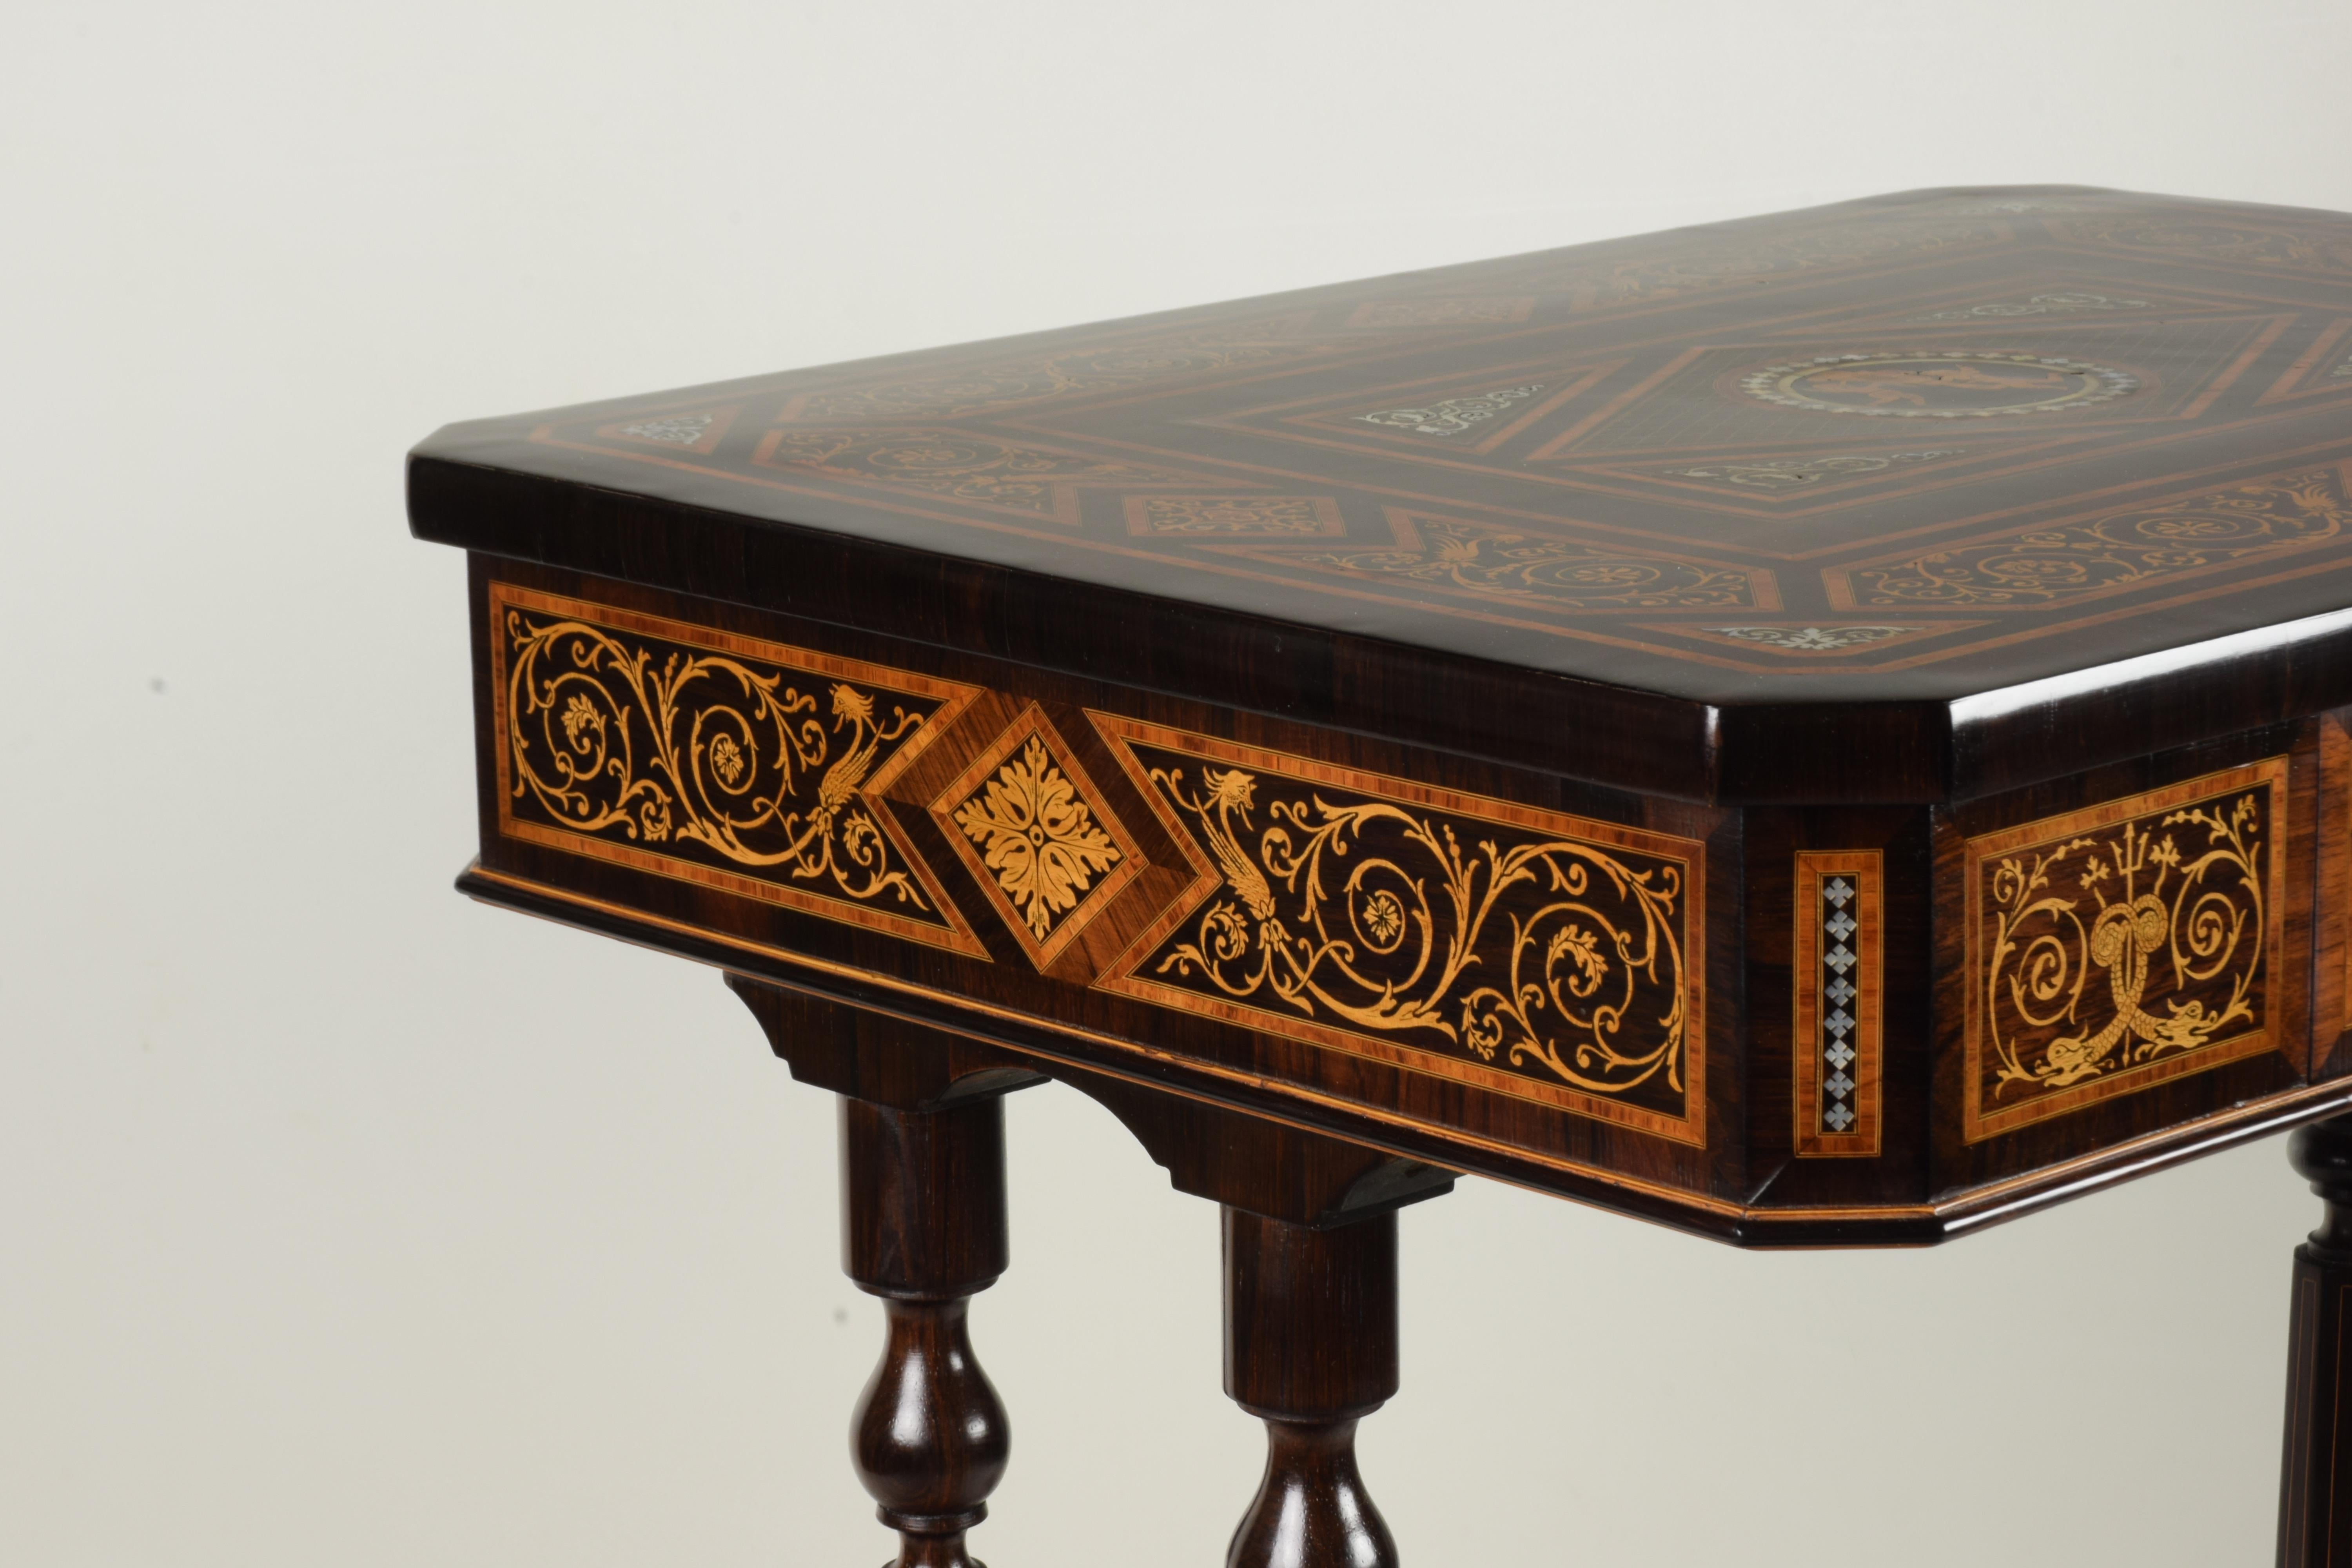 Italian Work Table, Florentine Cabinetry, circa 1850 For Sale